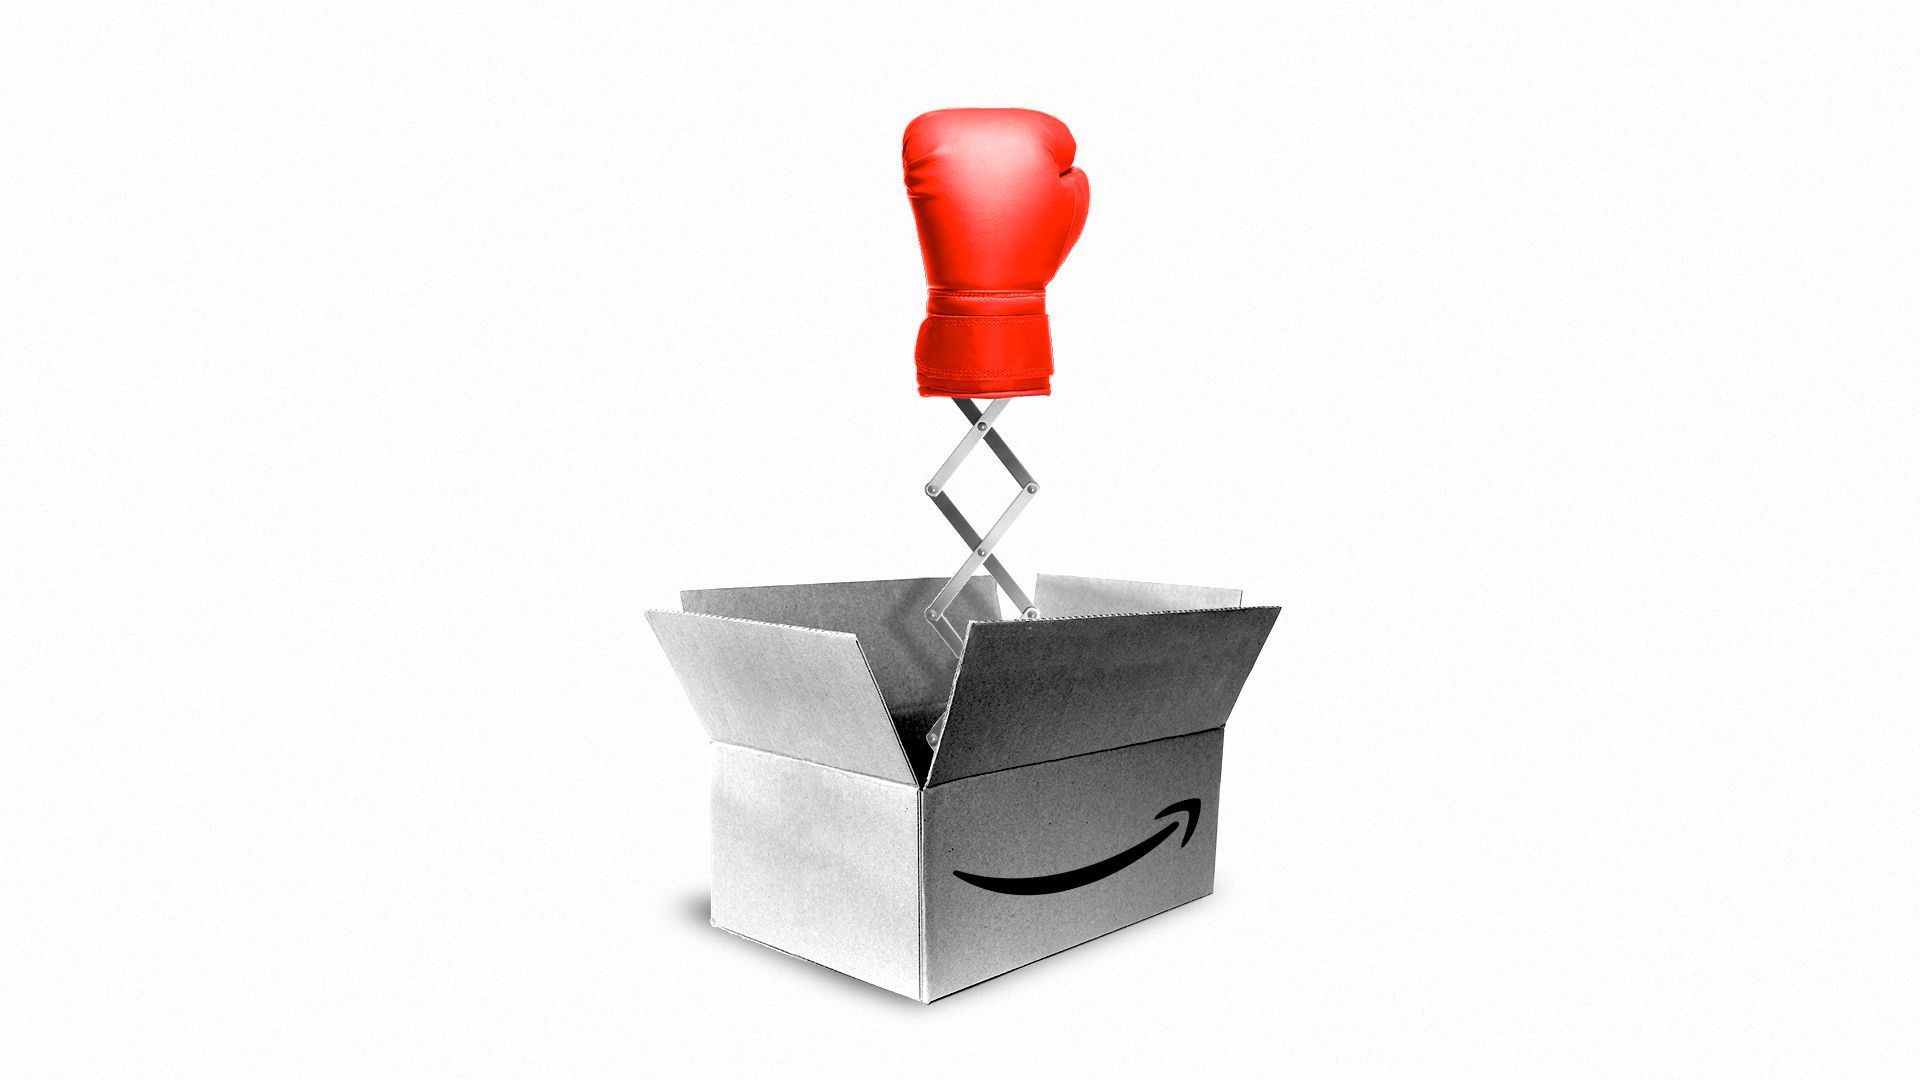 Illustration of an Amazon box with a boxing glove bursting out on a spring.